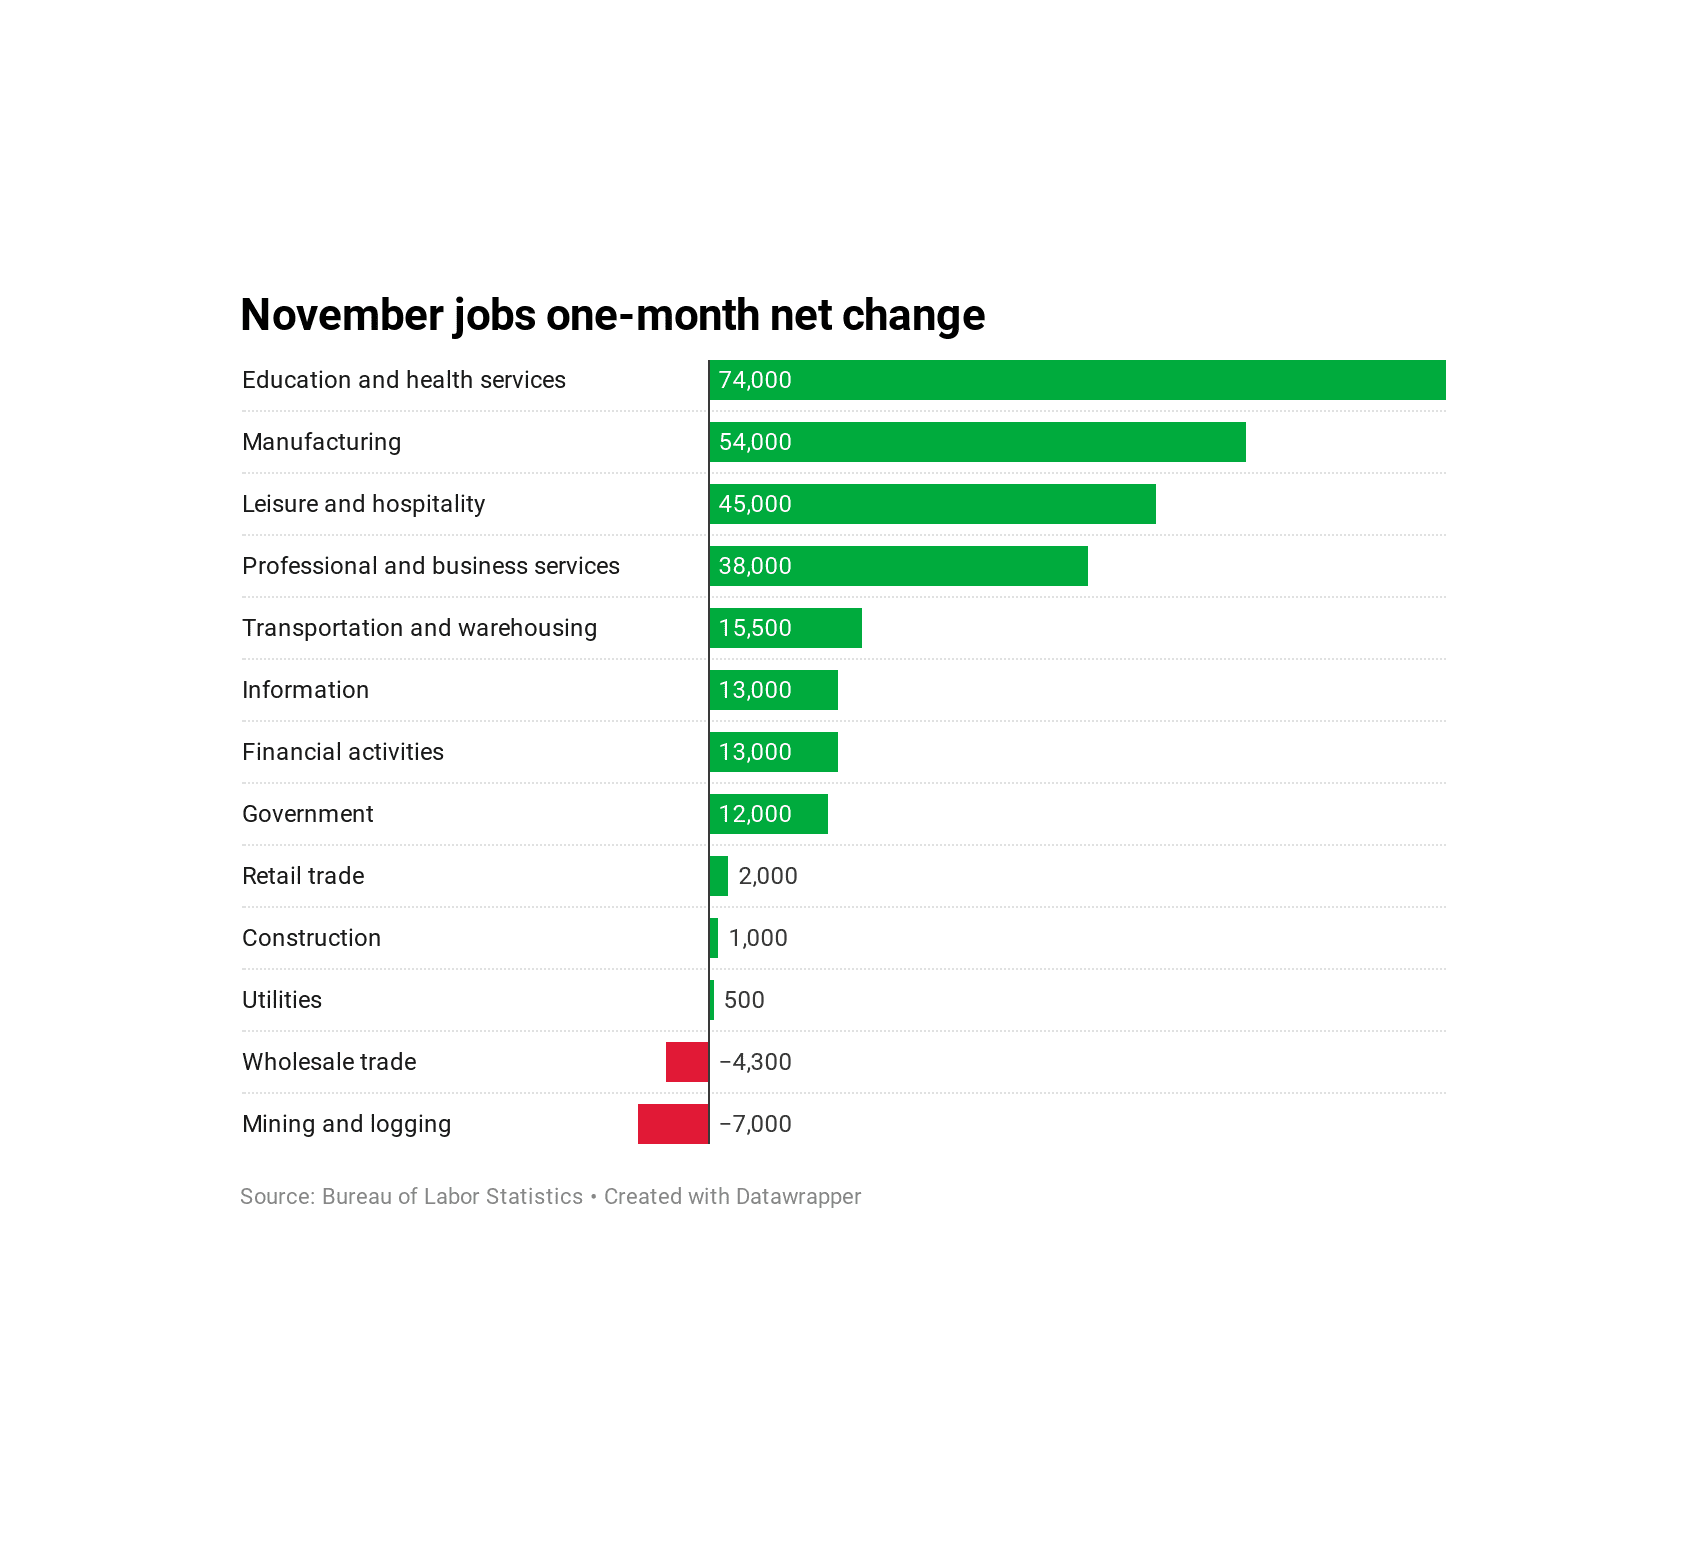 Us Manufacturing Jobs Chart